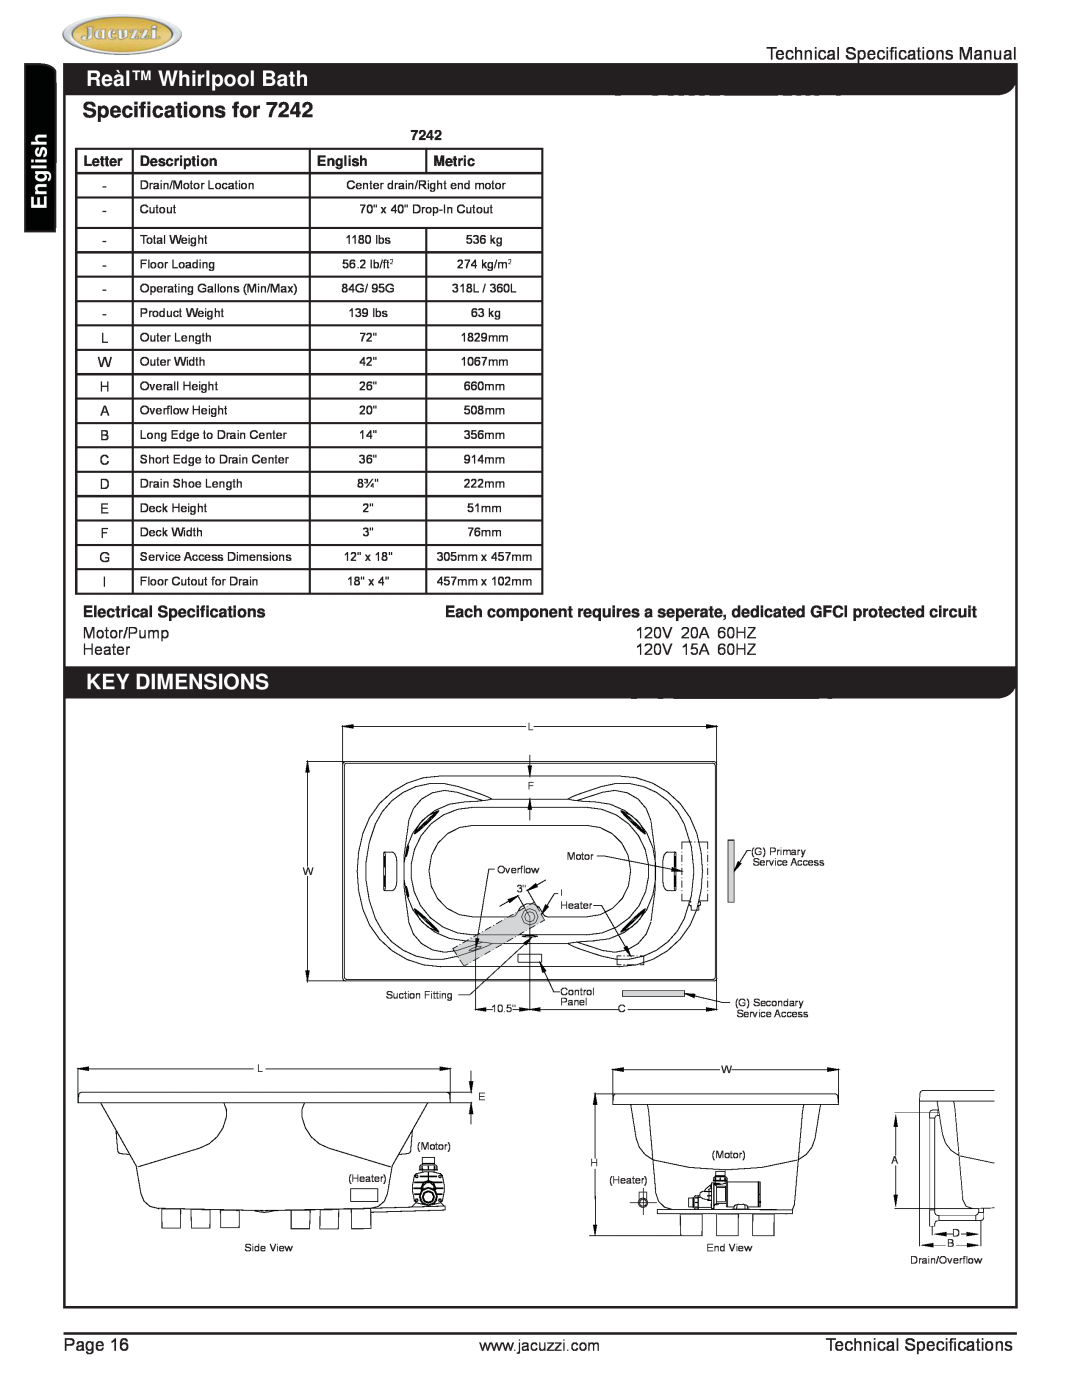 Jacuzzi HD85000 Reàl Whirlpool Bath, English, Speciﬁcations for, Key Dimensions, Electrical Speciﬁcations, Motor/Pump 